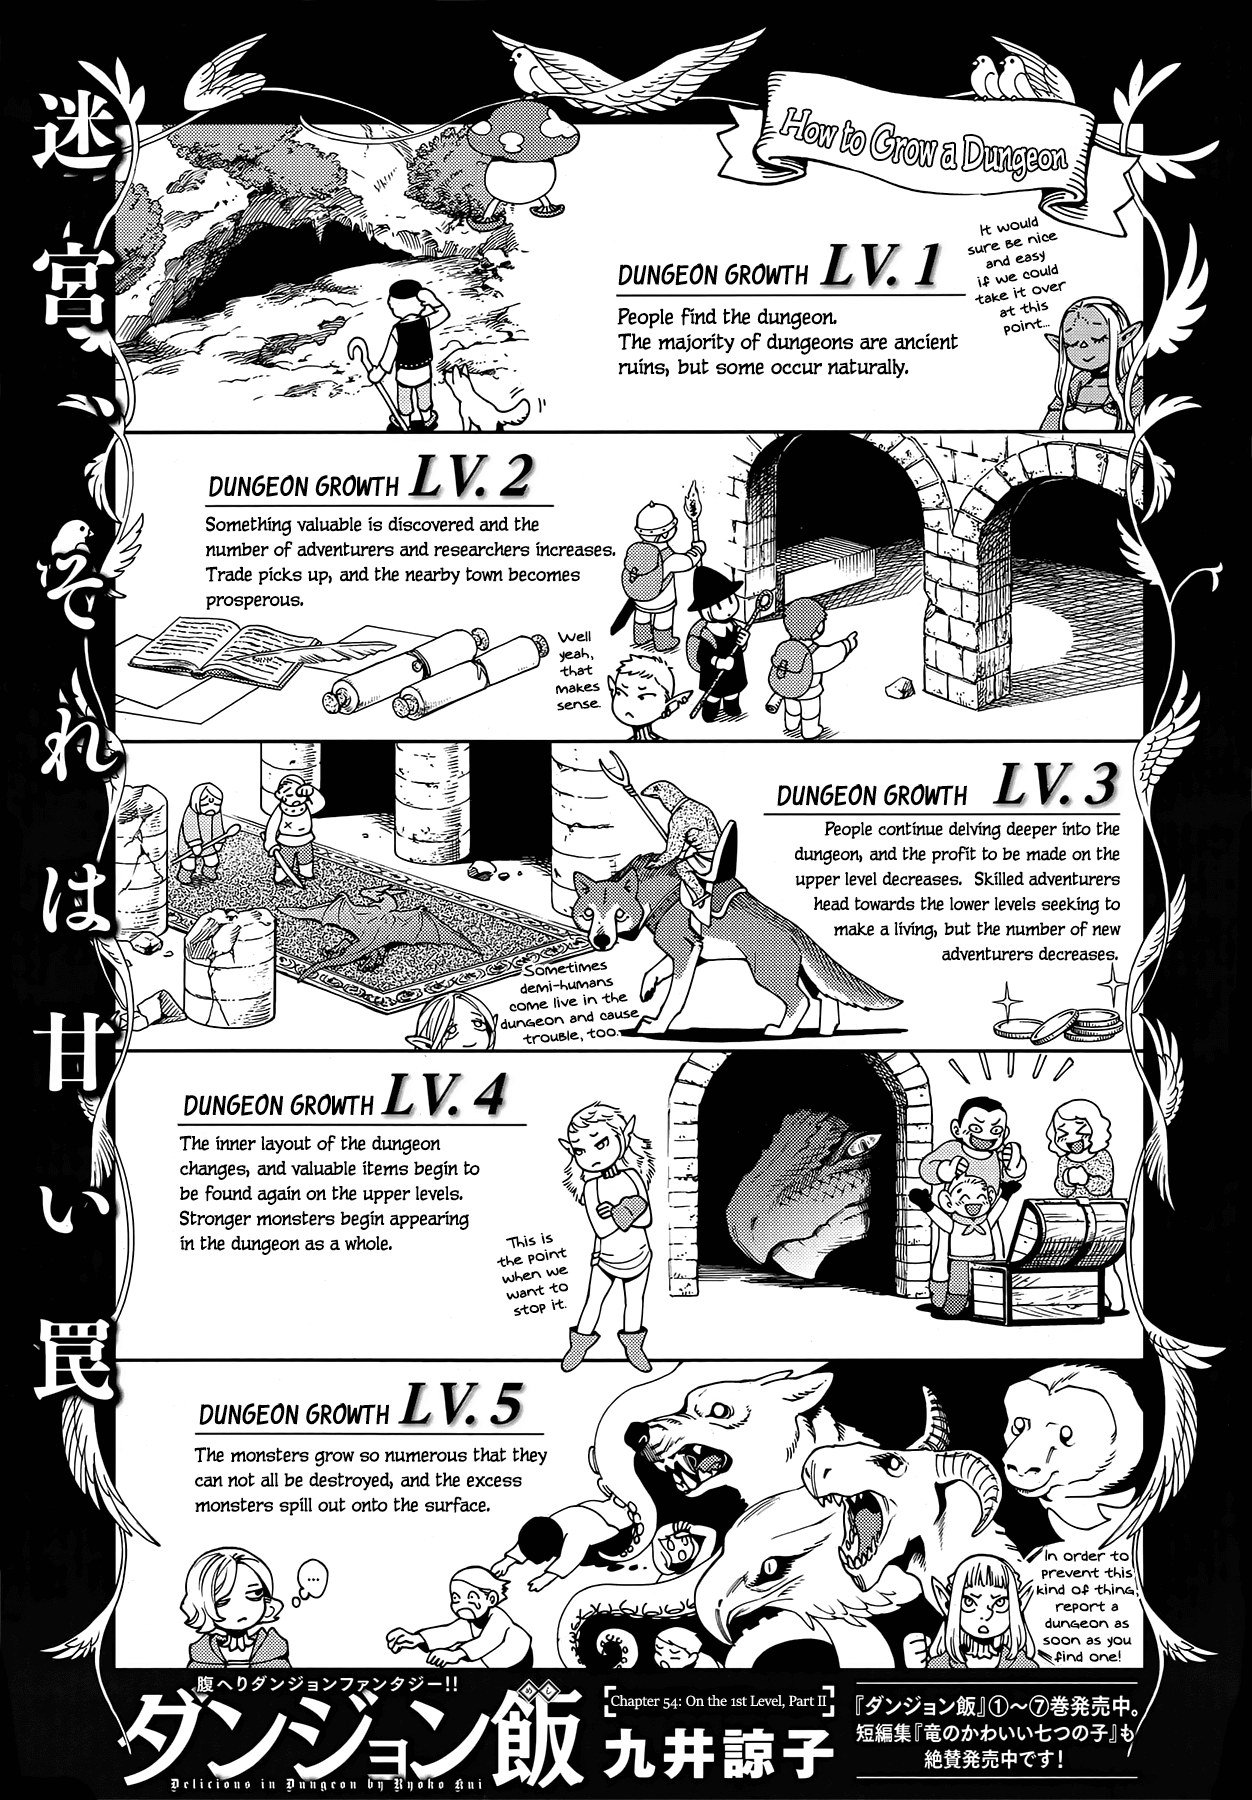 Dungeon Meshi Vol.8-Chapter.54-On-the-1st-Level,-Part-II Image